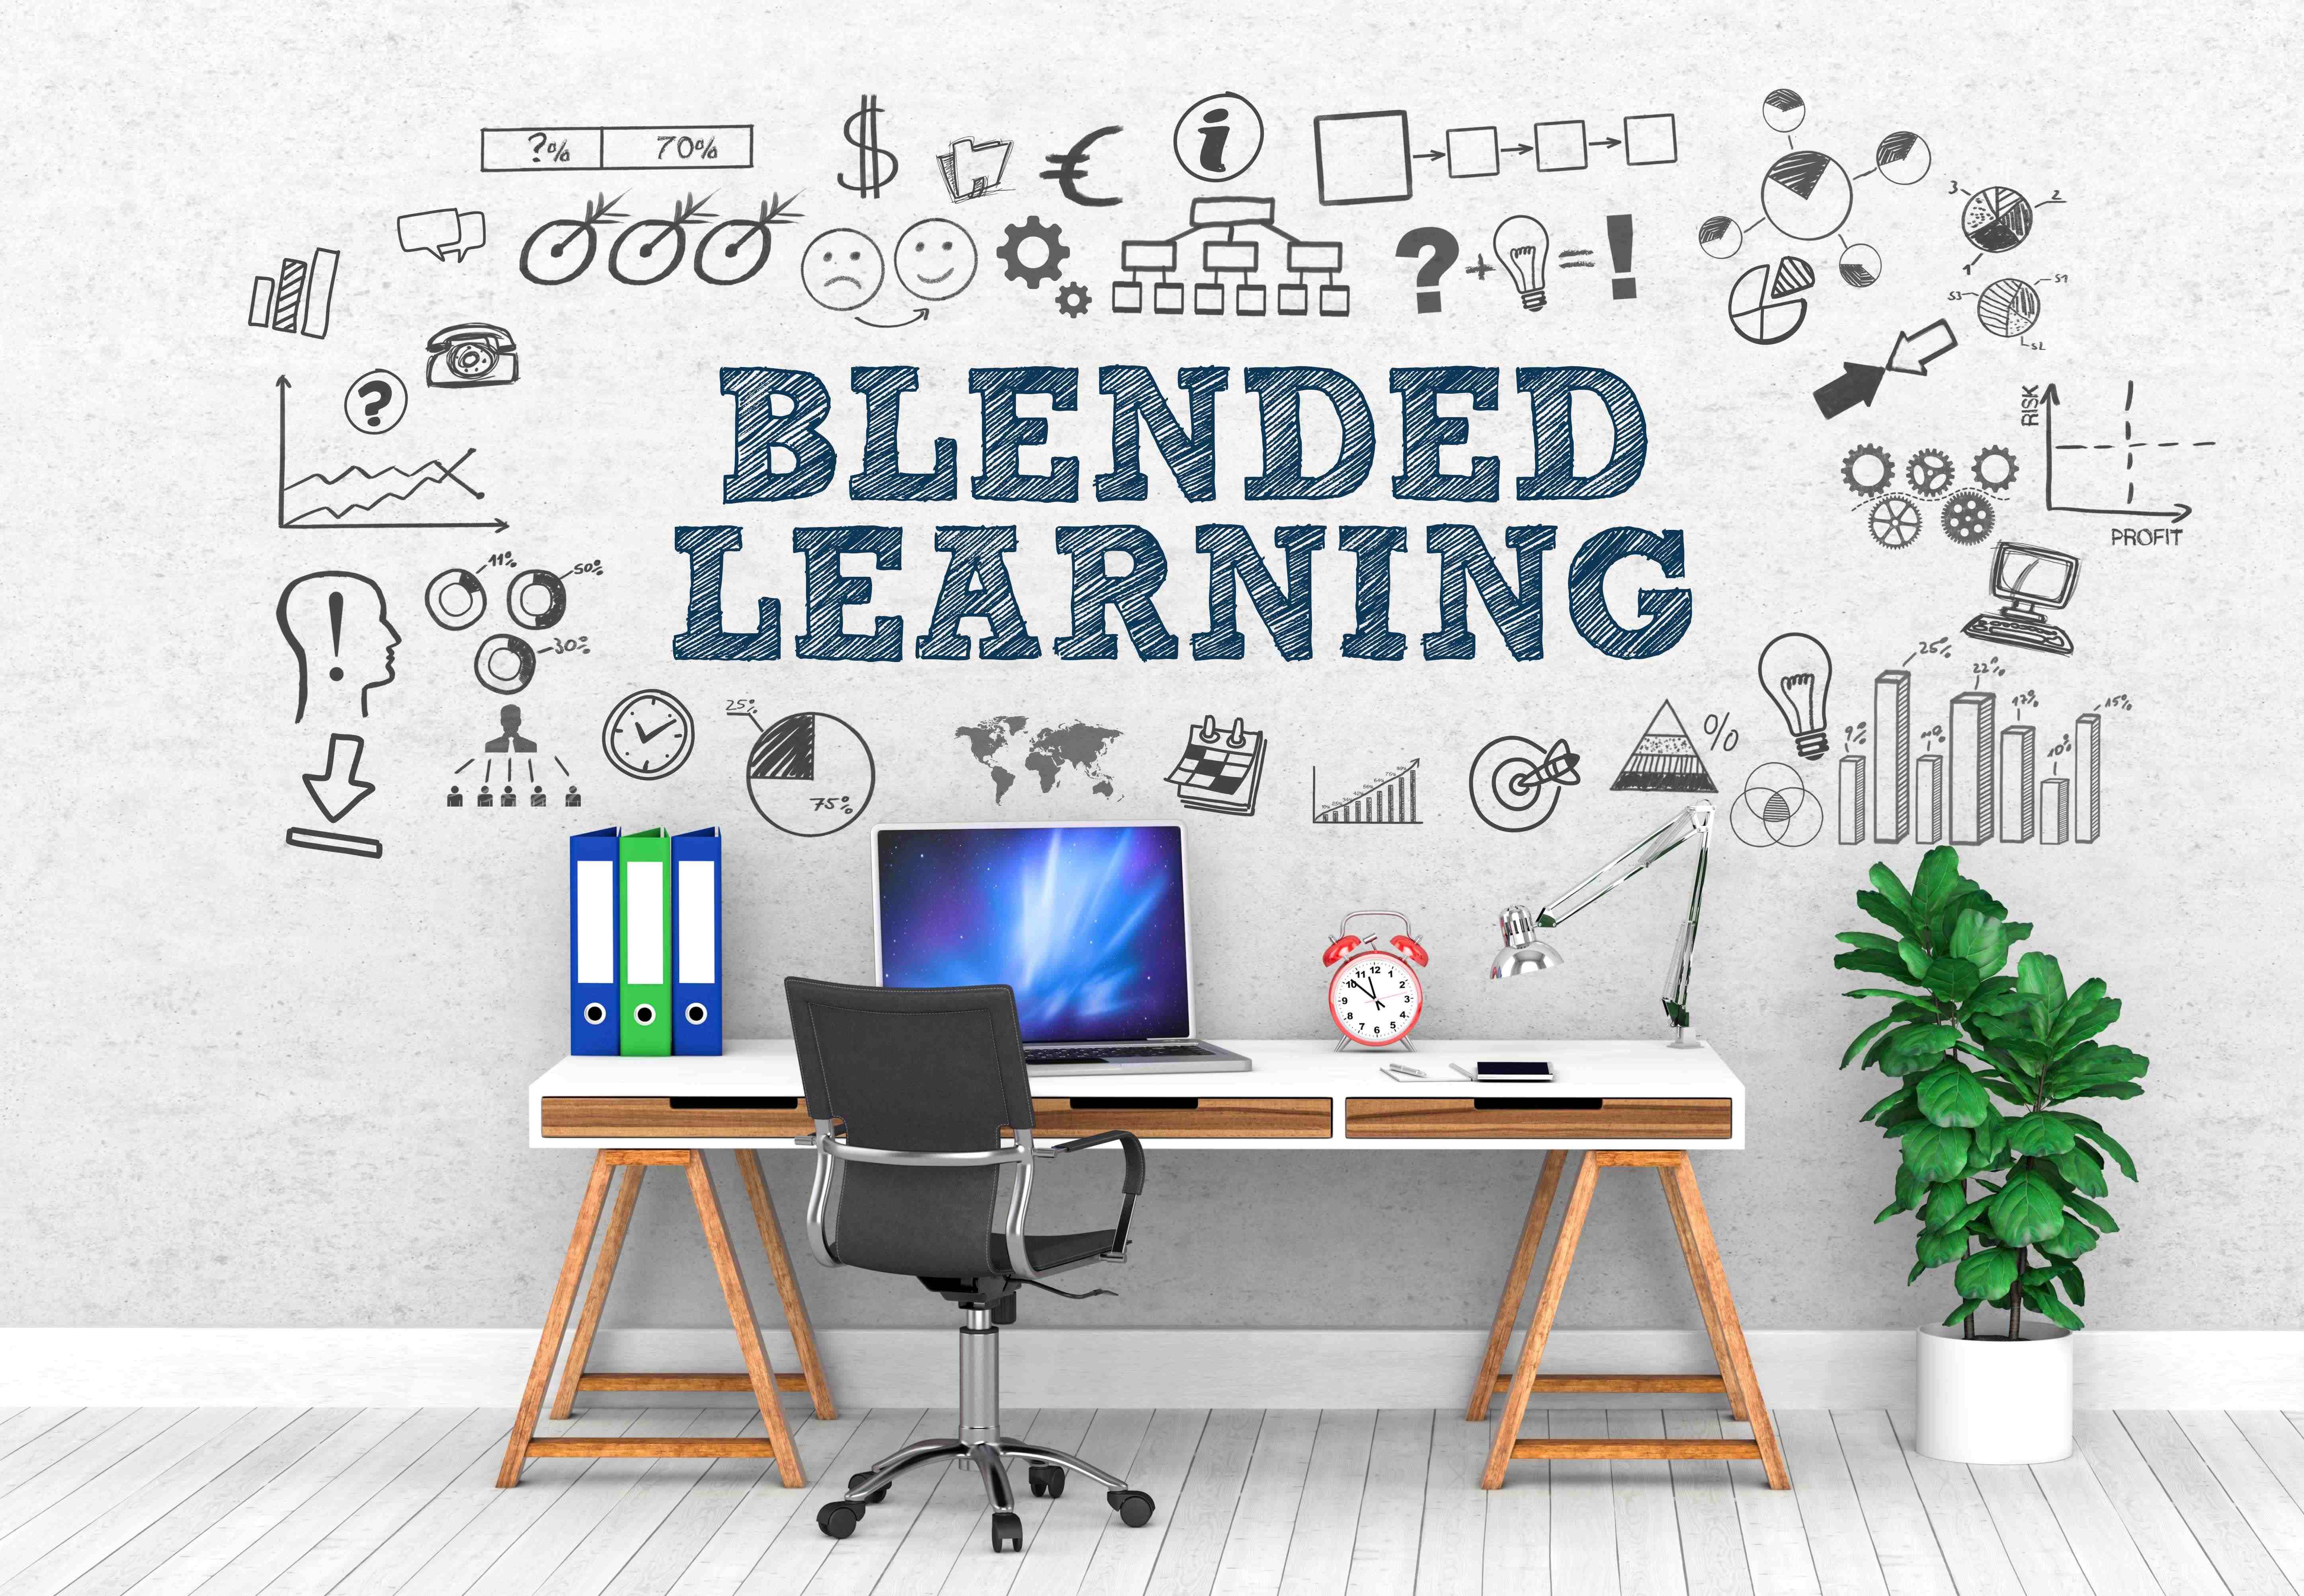 Digital & Blended Learning – Time, Retention and ROI.